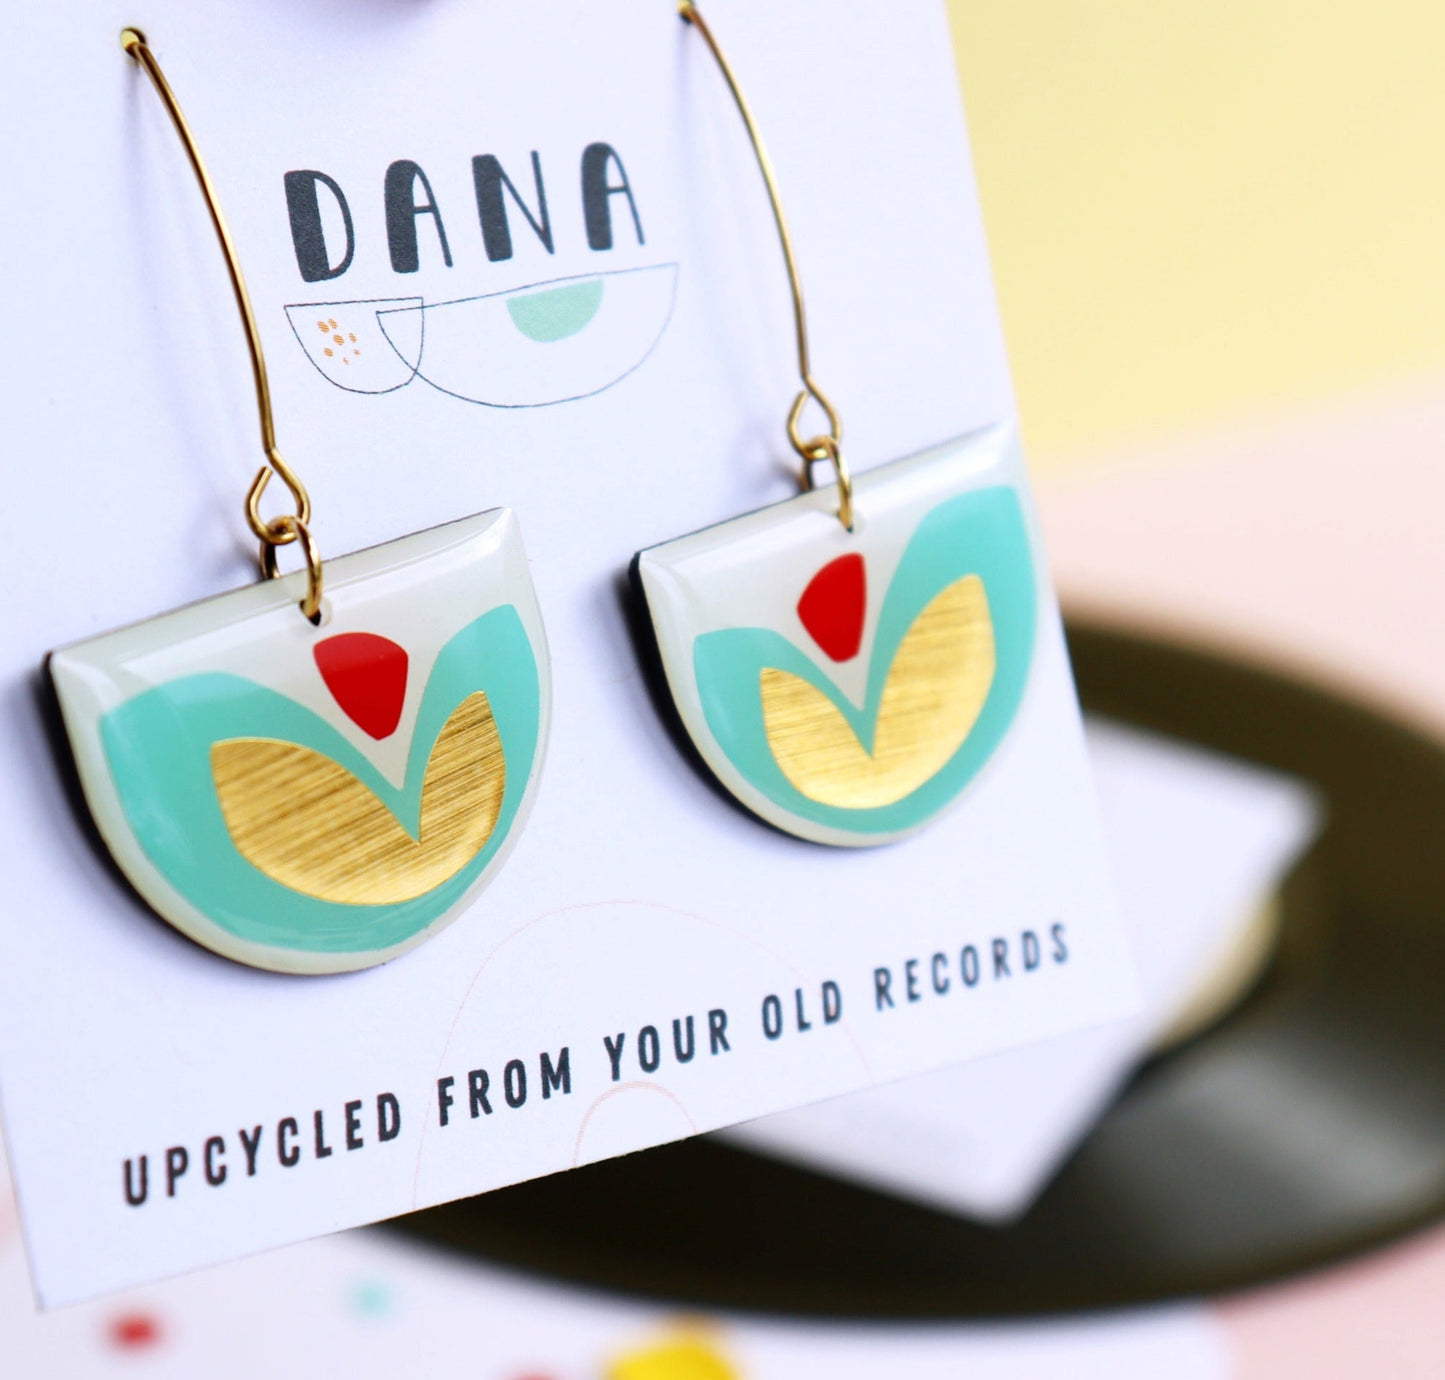 FLOR earrings in turquoise & gold with a pop of red / upcycled from your old records